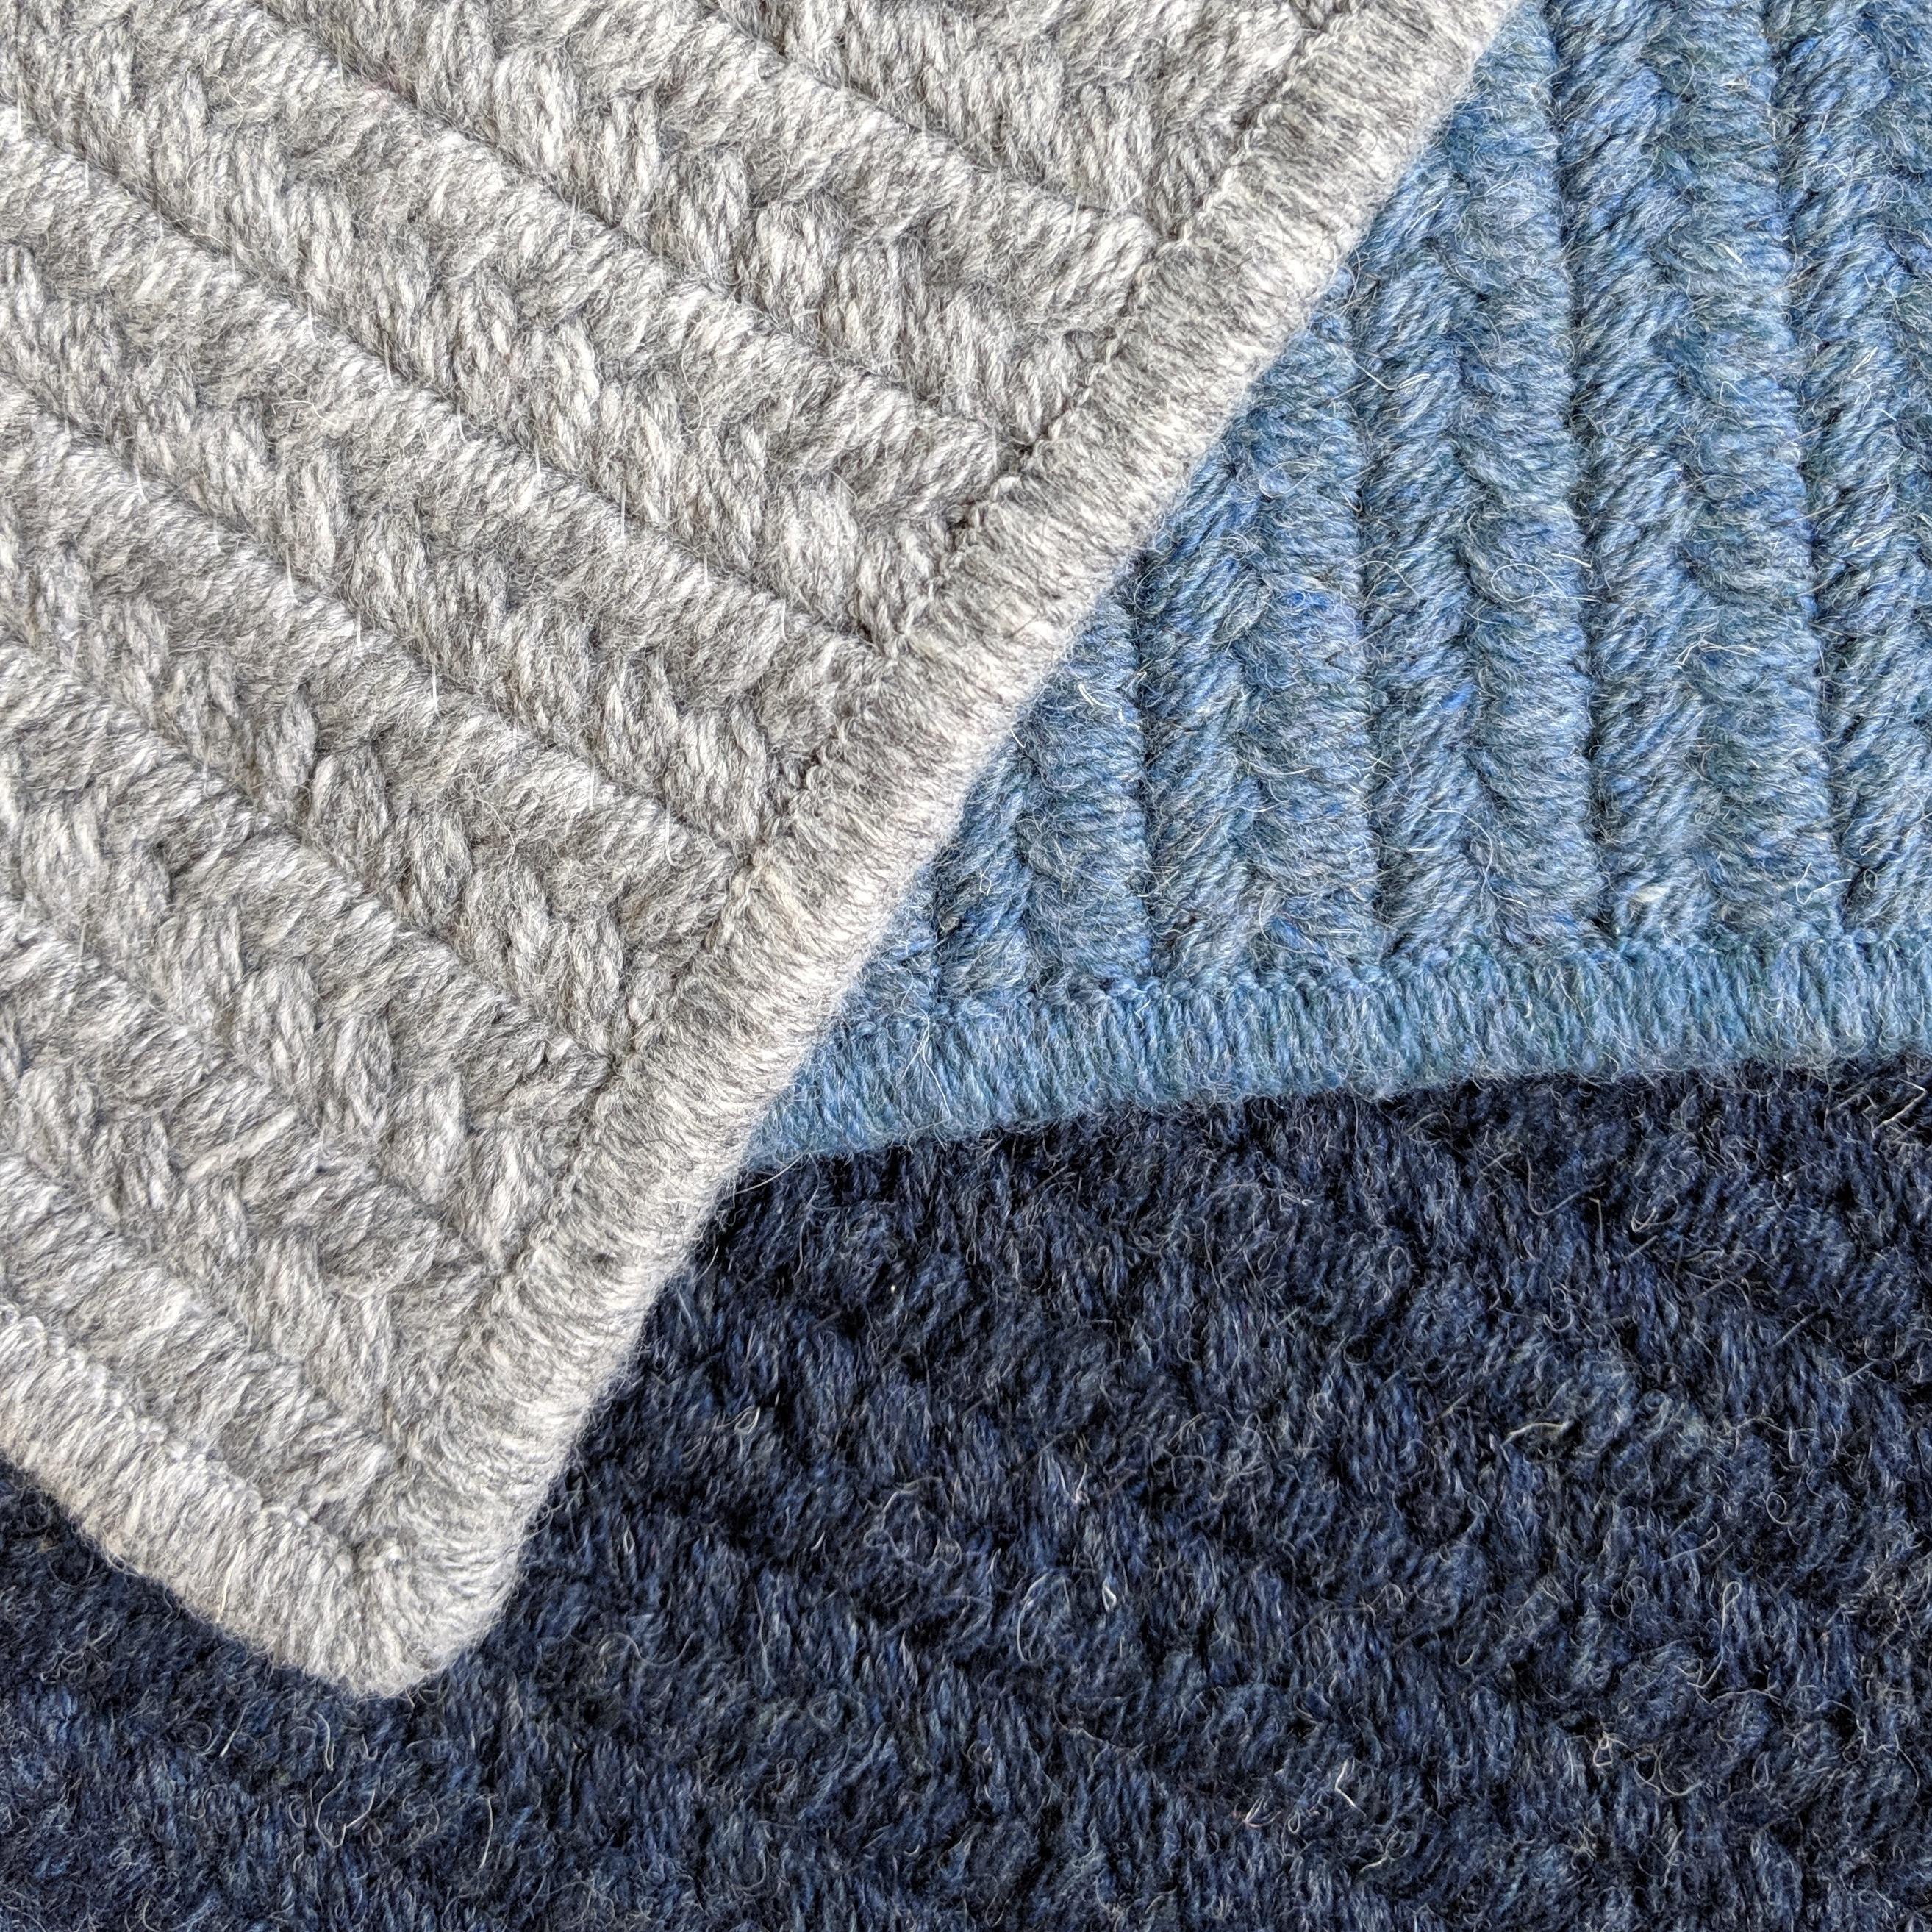 This listing is for a 12 x 15 rug in the colors shown in the first image plus a rug pad for use on hard surfaces.

We offer a number of different colors. We can mix colors akin to the rug photographed or the rug can be produced out of a single color